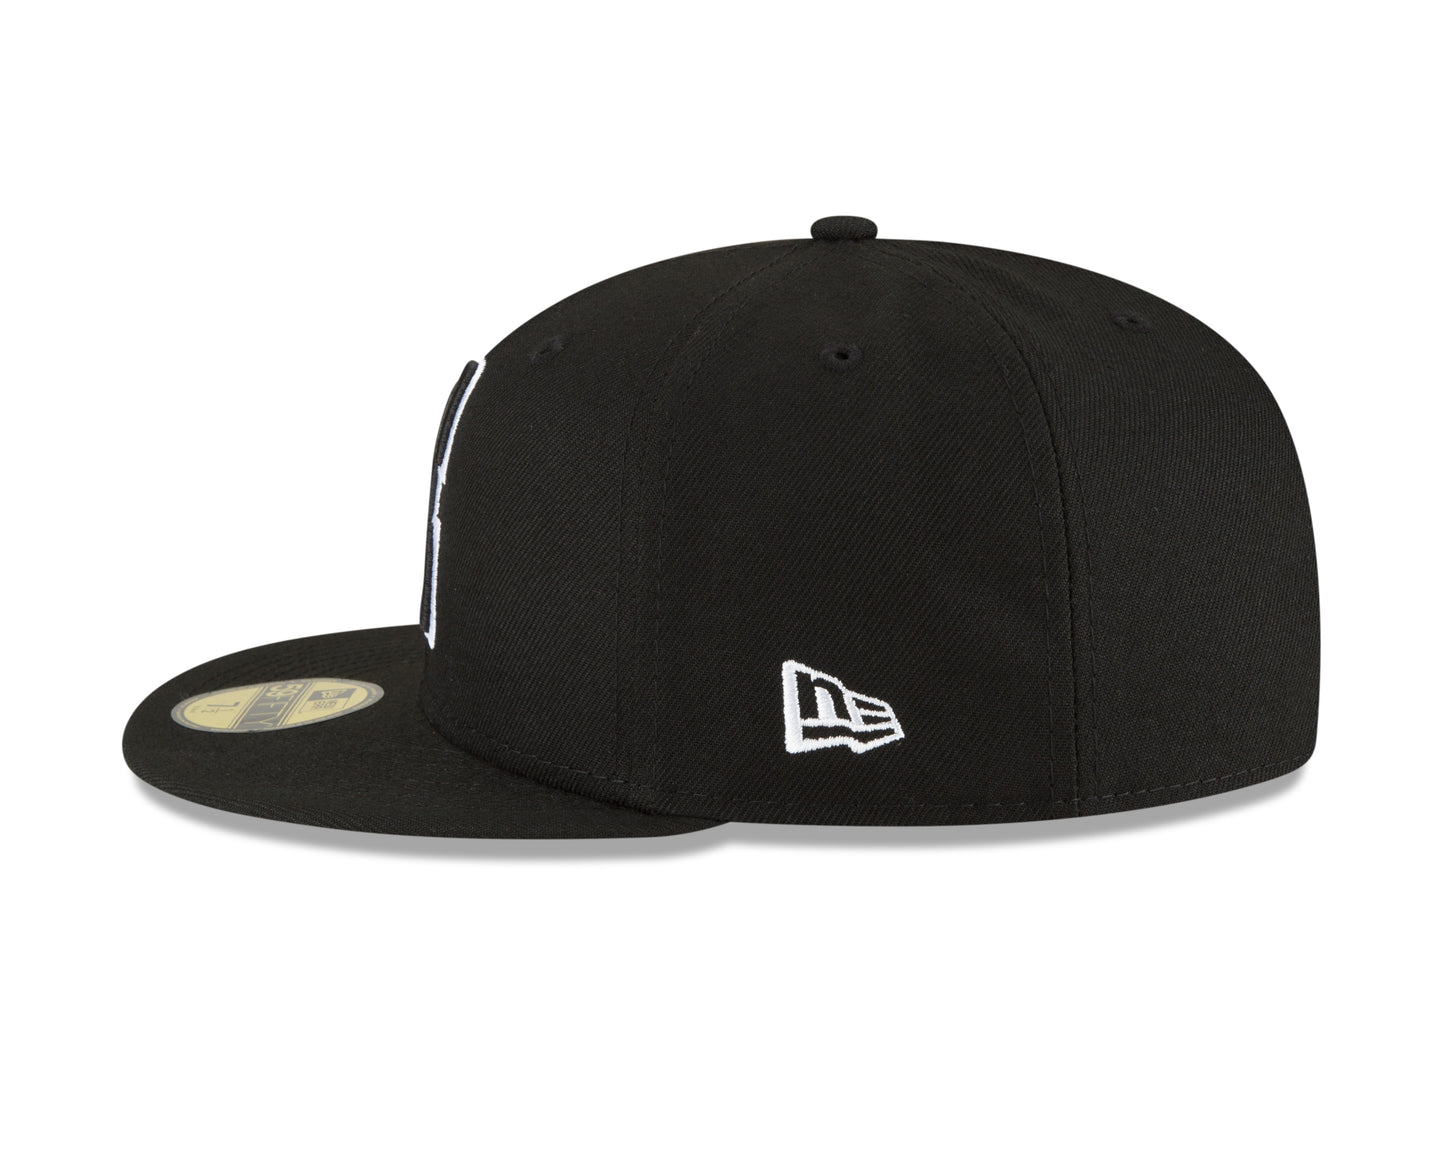 Los Angeles Clippers New Era Black and White Back Half 59fifty Fitted Hat